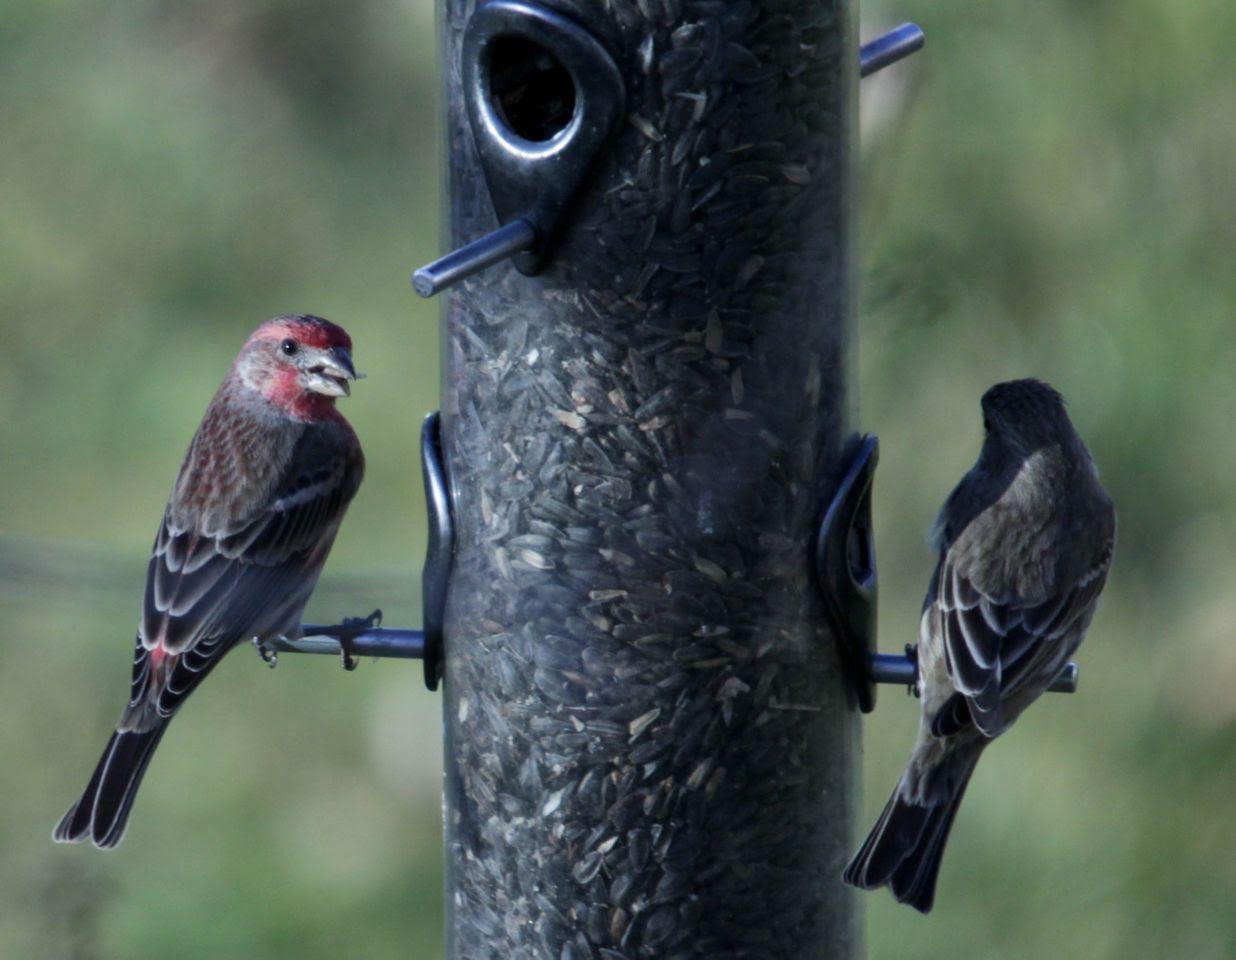 This photo shows a section of a tube-style bird feeder filled with black sunflower seeds. On the feeder perch to the left is a male house finch (a bird with brown wings and a red head) and on the perch to the right is a female house finch (brown).